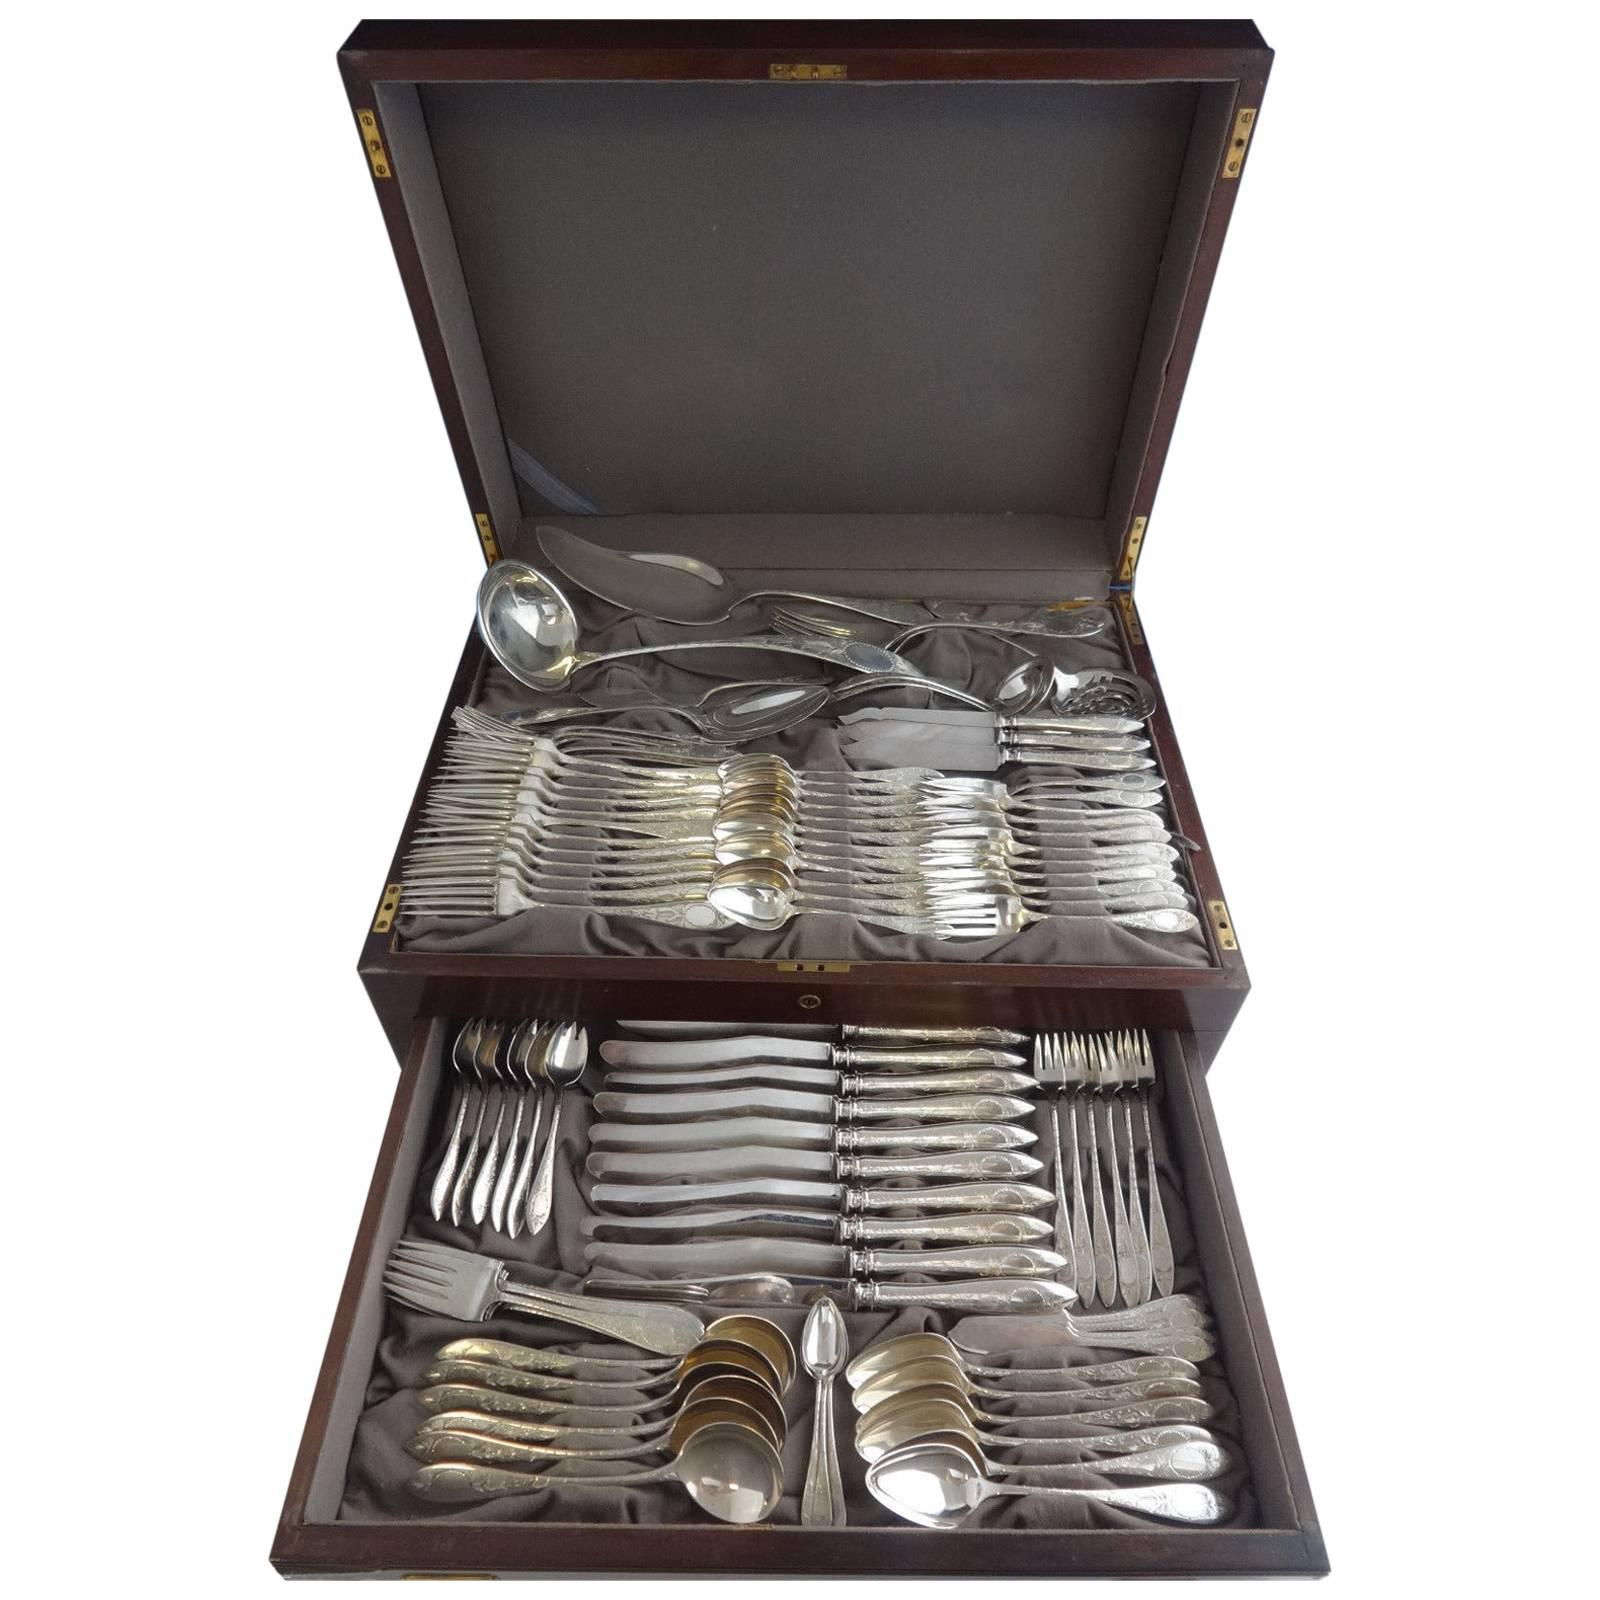 Beautiful Lafayette Engraved by Towle sterling silver flatware set of 110 pieces. This pattern has a hand engraved design and is circa 1905. This large set includes:

12 dinner knives, 10 3/4